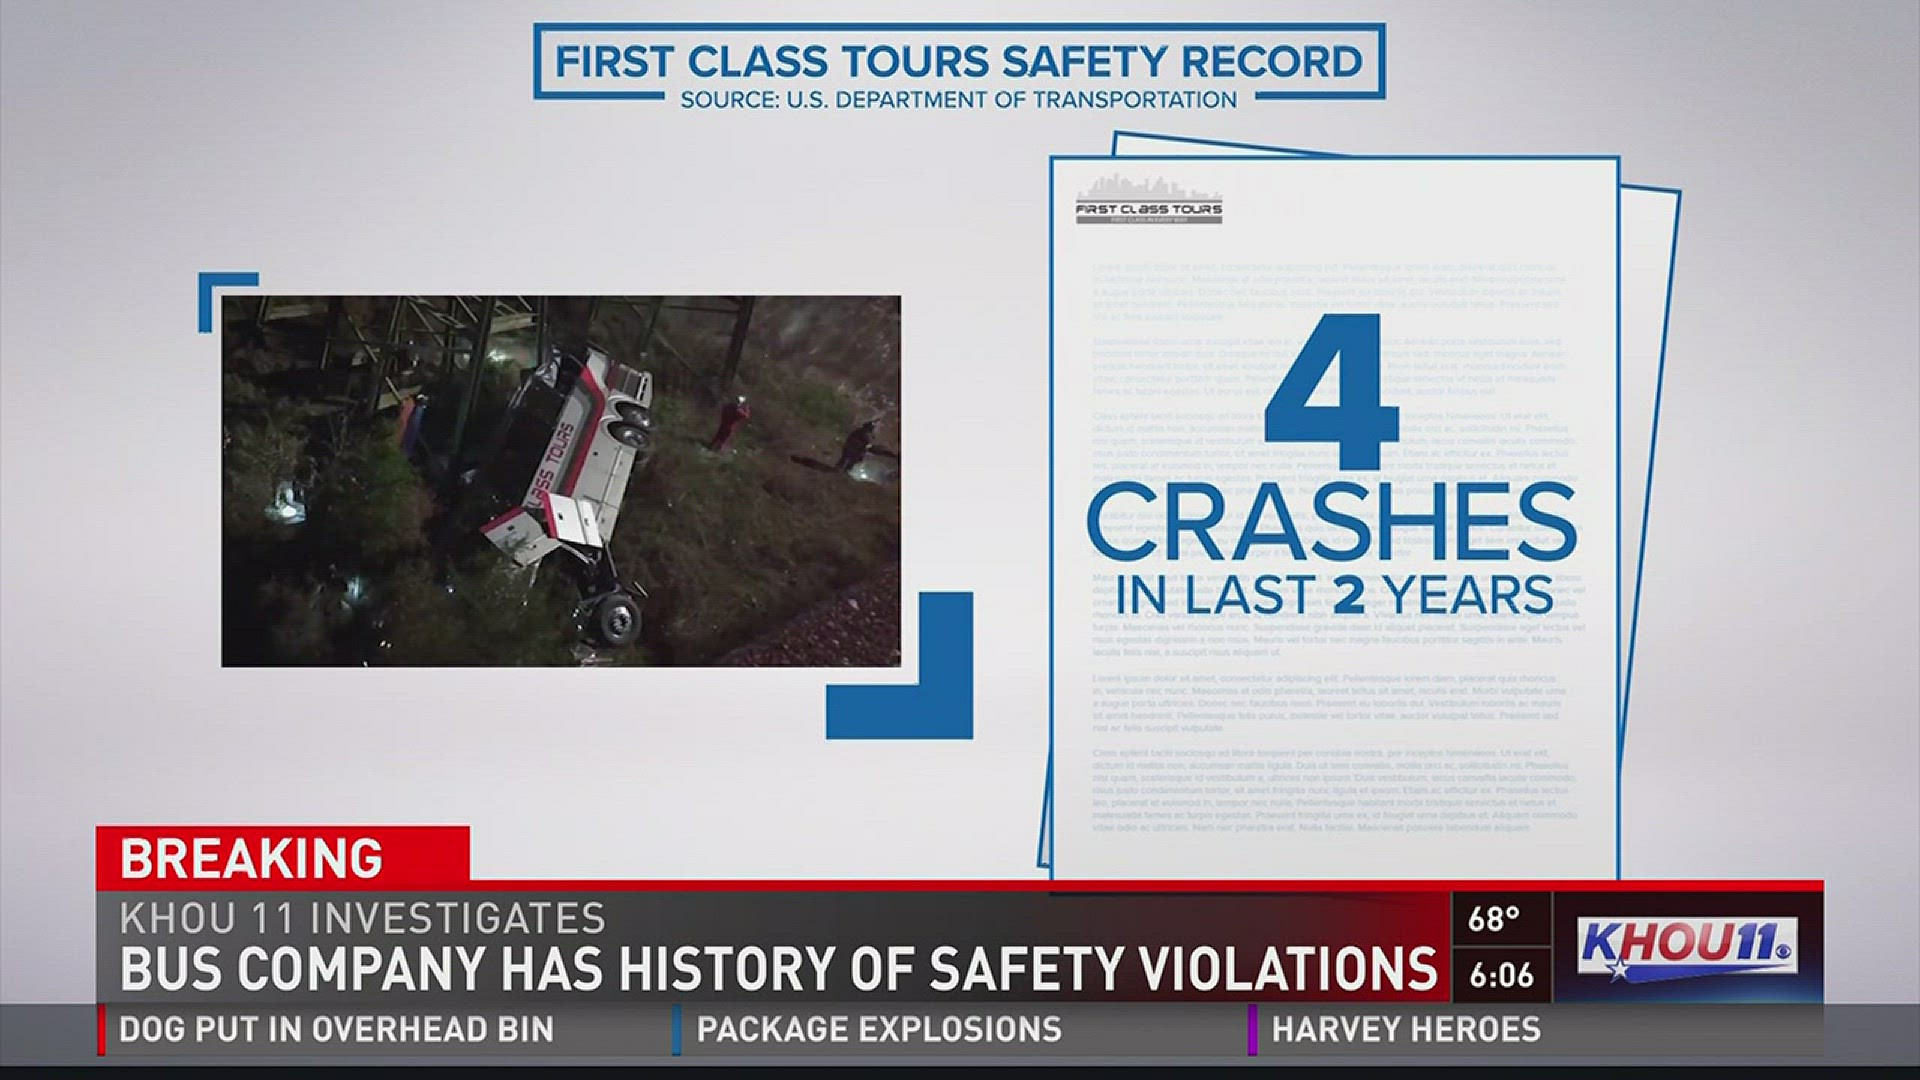 Federal Motor Carrier Safety Administration records show that in the past two years, First Class Tours has been involved in four other crashes, including a fatal crash in Houston in May 2017.